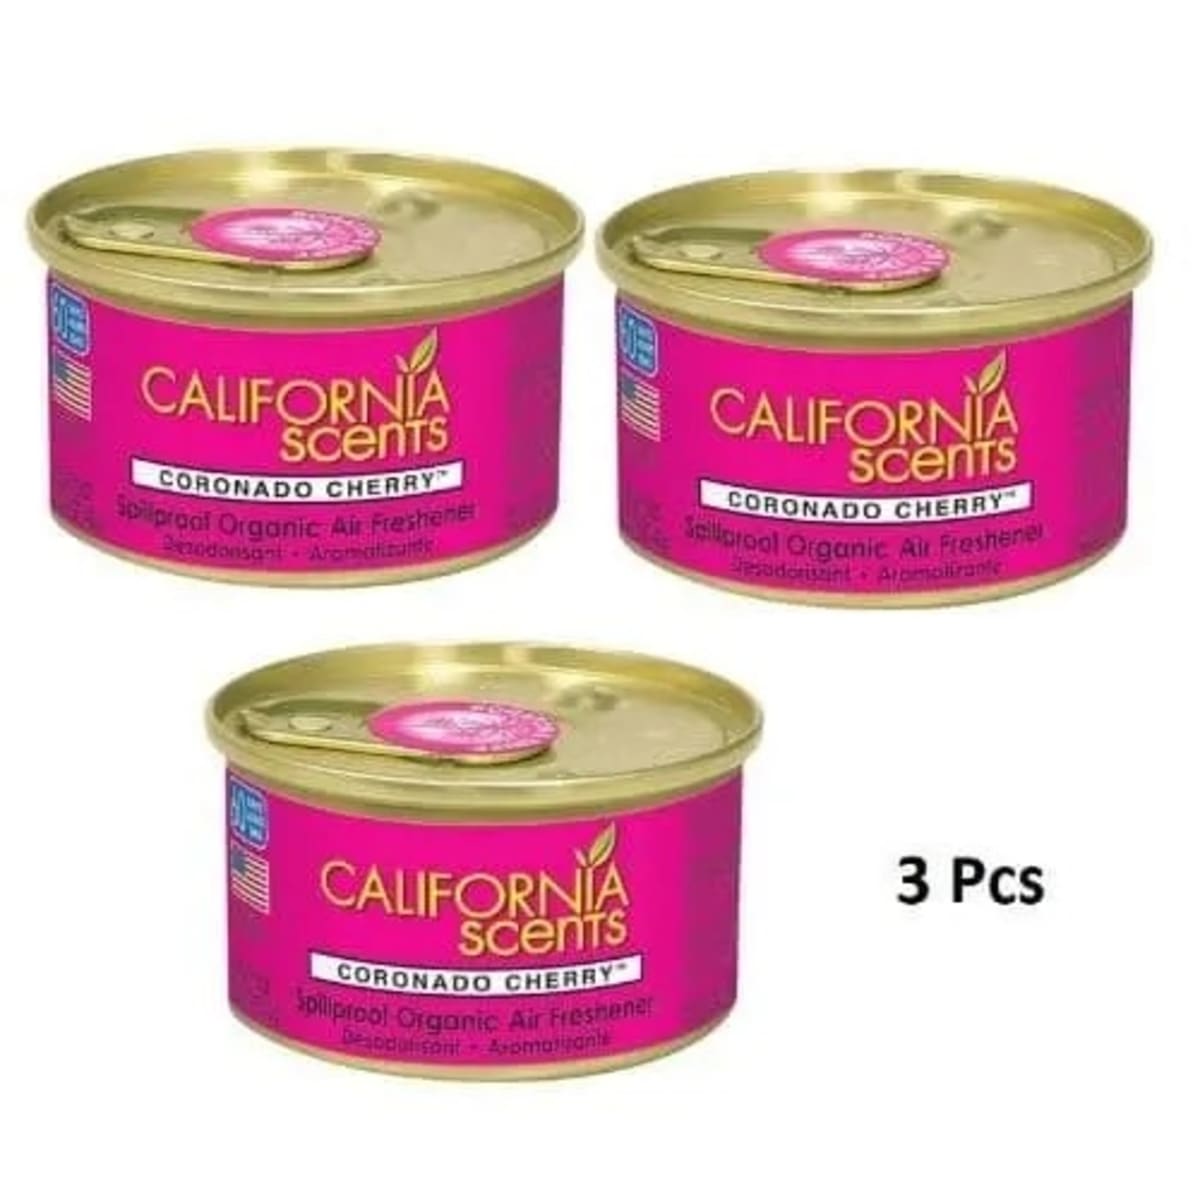 California Scents Air Freshener - 42g x 3pieces